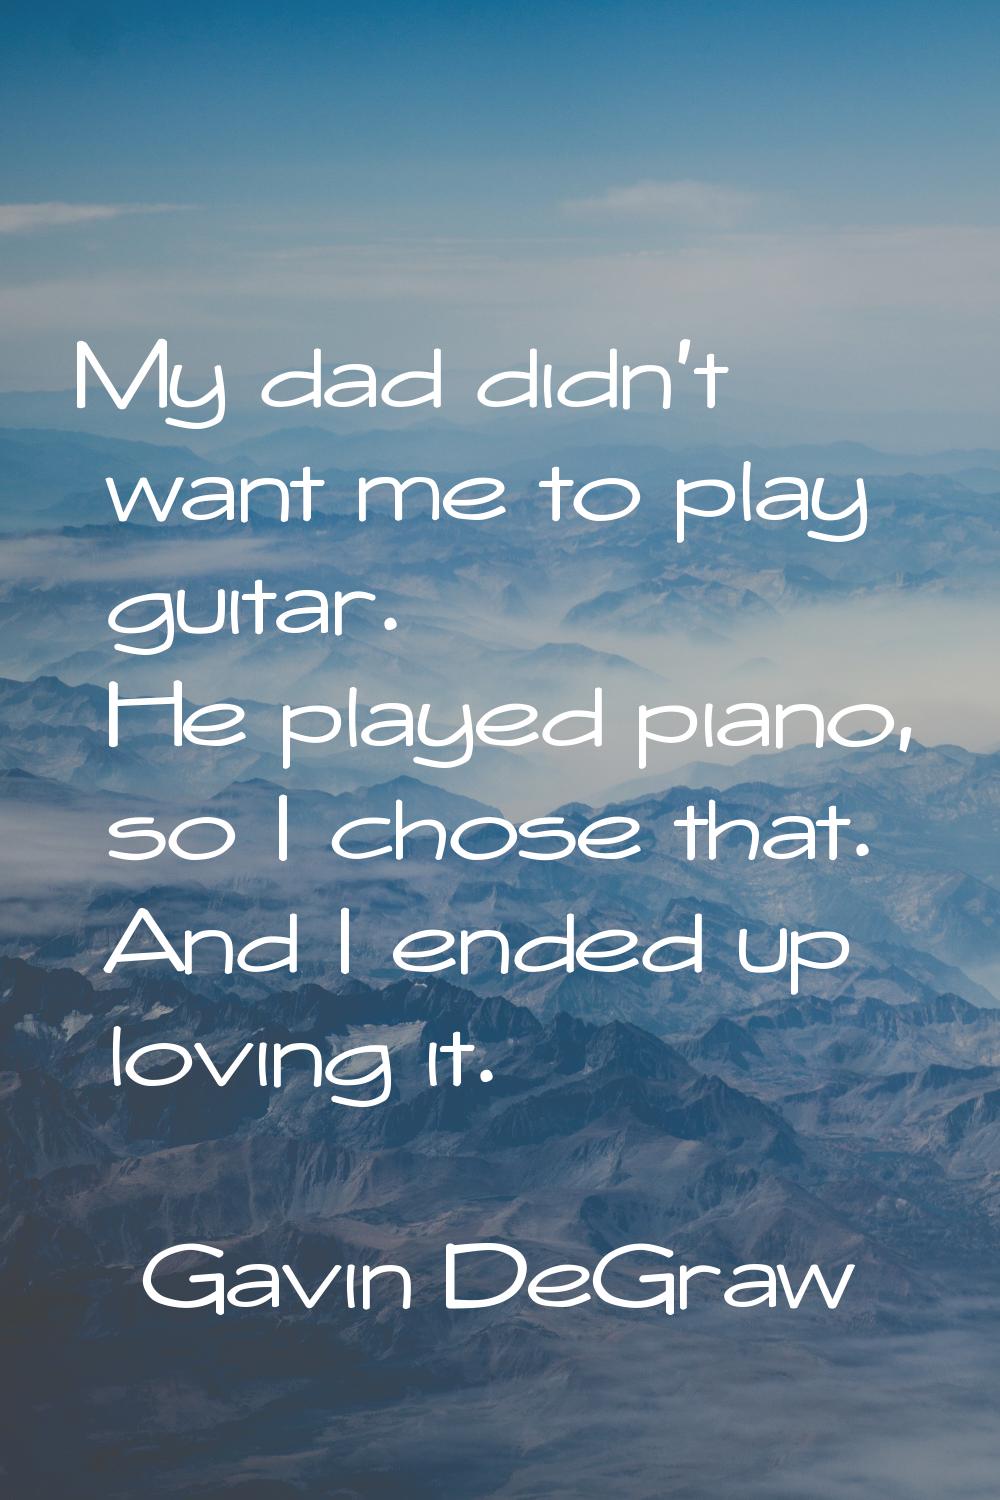 My dad didn't want me to play guitar. He played piano, so I chose that. And I ended up loving it.